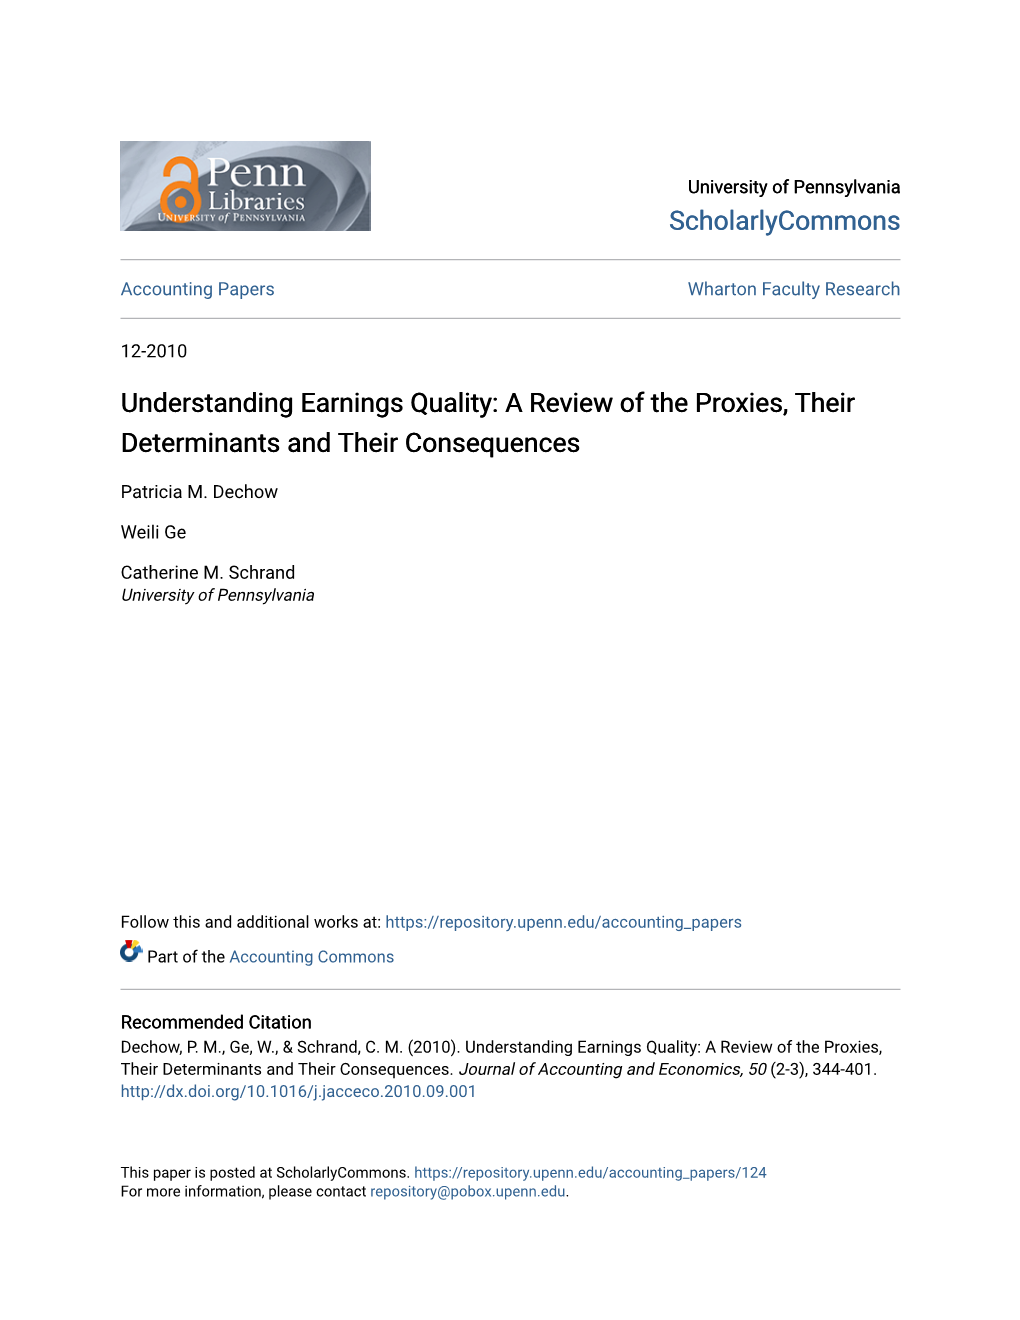 Understanding Earnings Quality: a Review of the Proxies, Their Determinants and Their Consequences